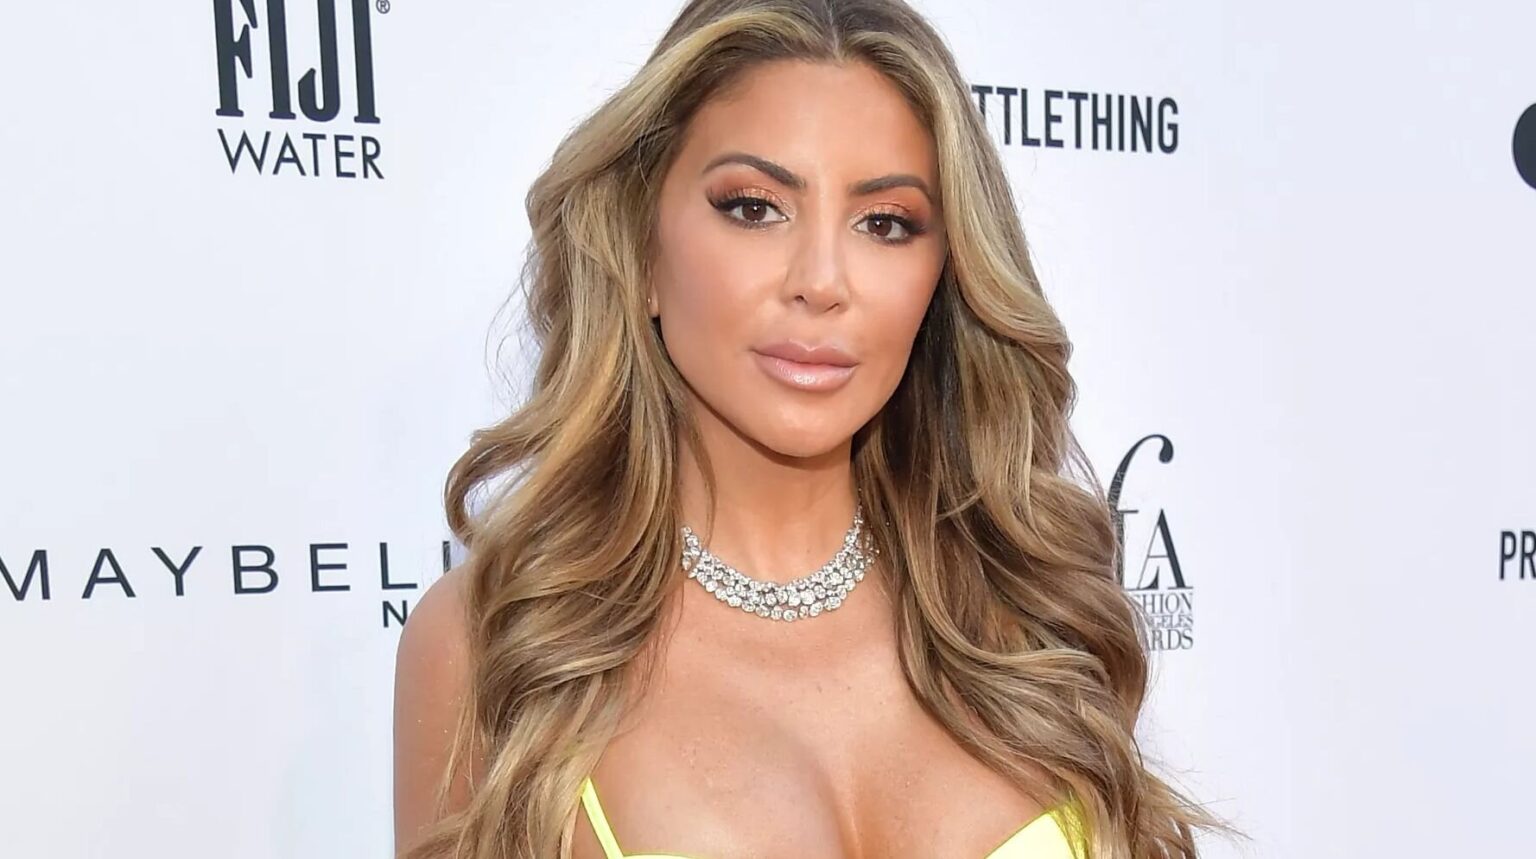 Larsa Pippen's more than reality royalty or an NBA ex-wife – she's a model & Instagram star. Here are our top picks for Larsa Pippen lewks on Instagram.